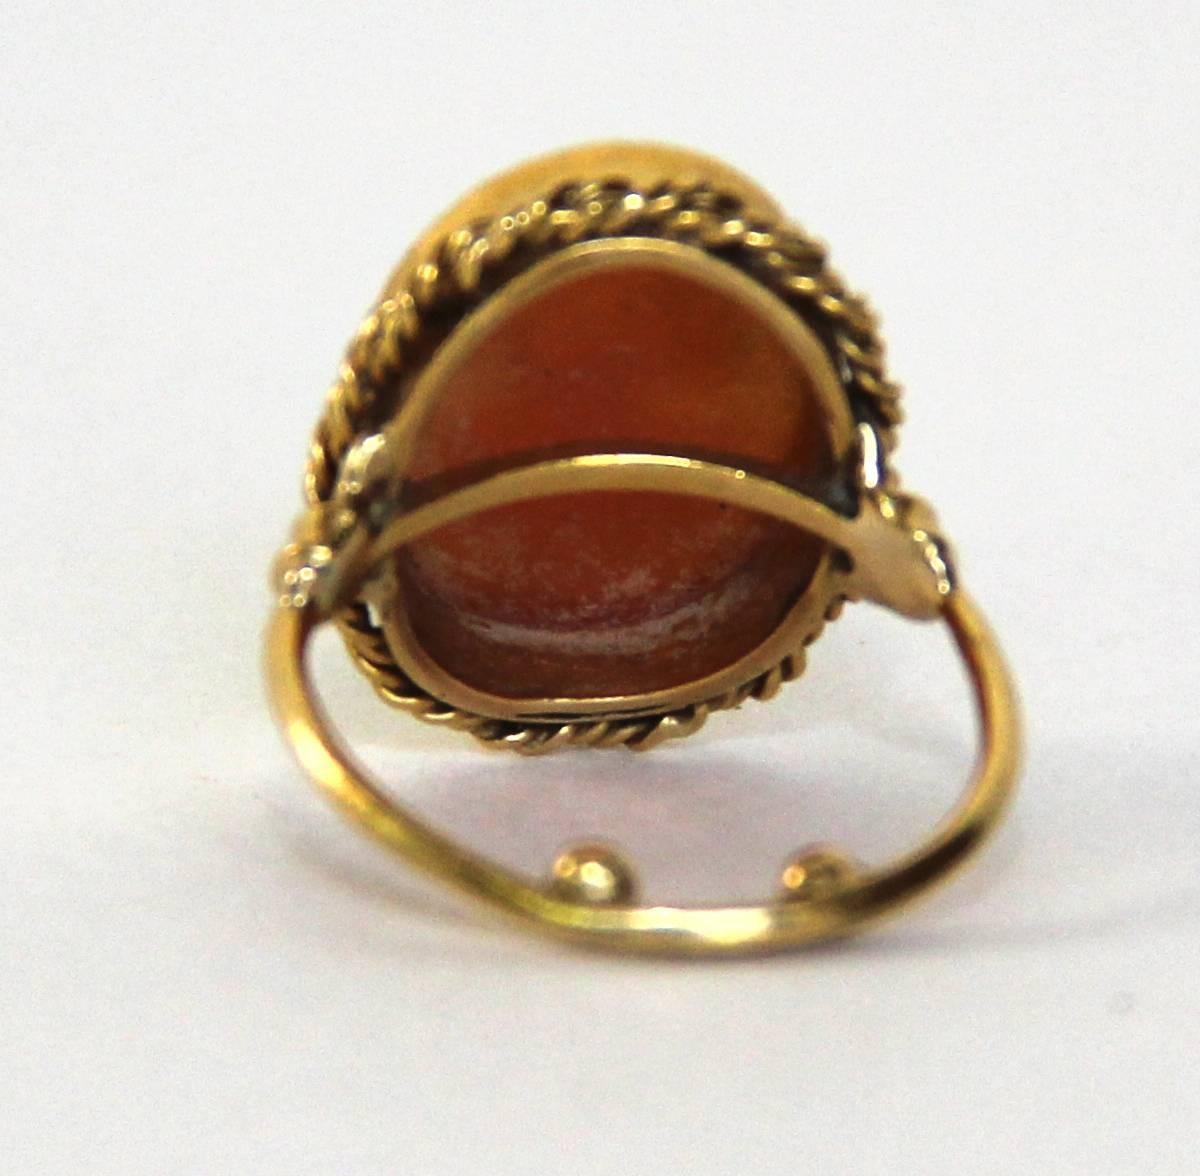 Russian turn of the 20th century 18mm carnelian cameo with hand-carved ballerina, set in 18 karat (not stamped) gold. Two gold balls at the bottom of the ring prevent it from turning. Ring size 6 3/4